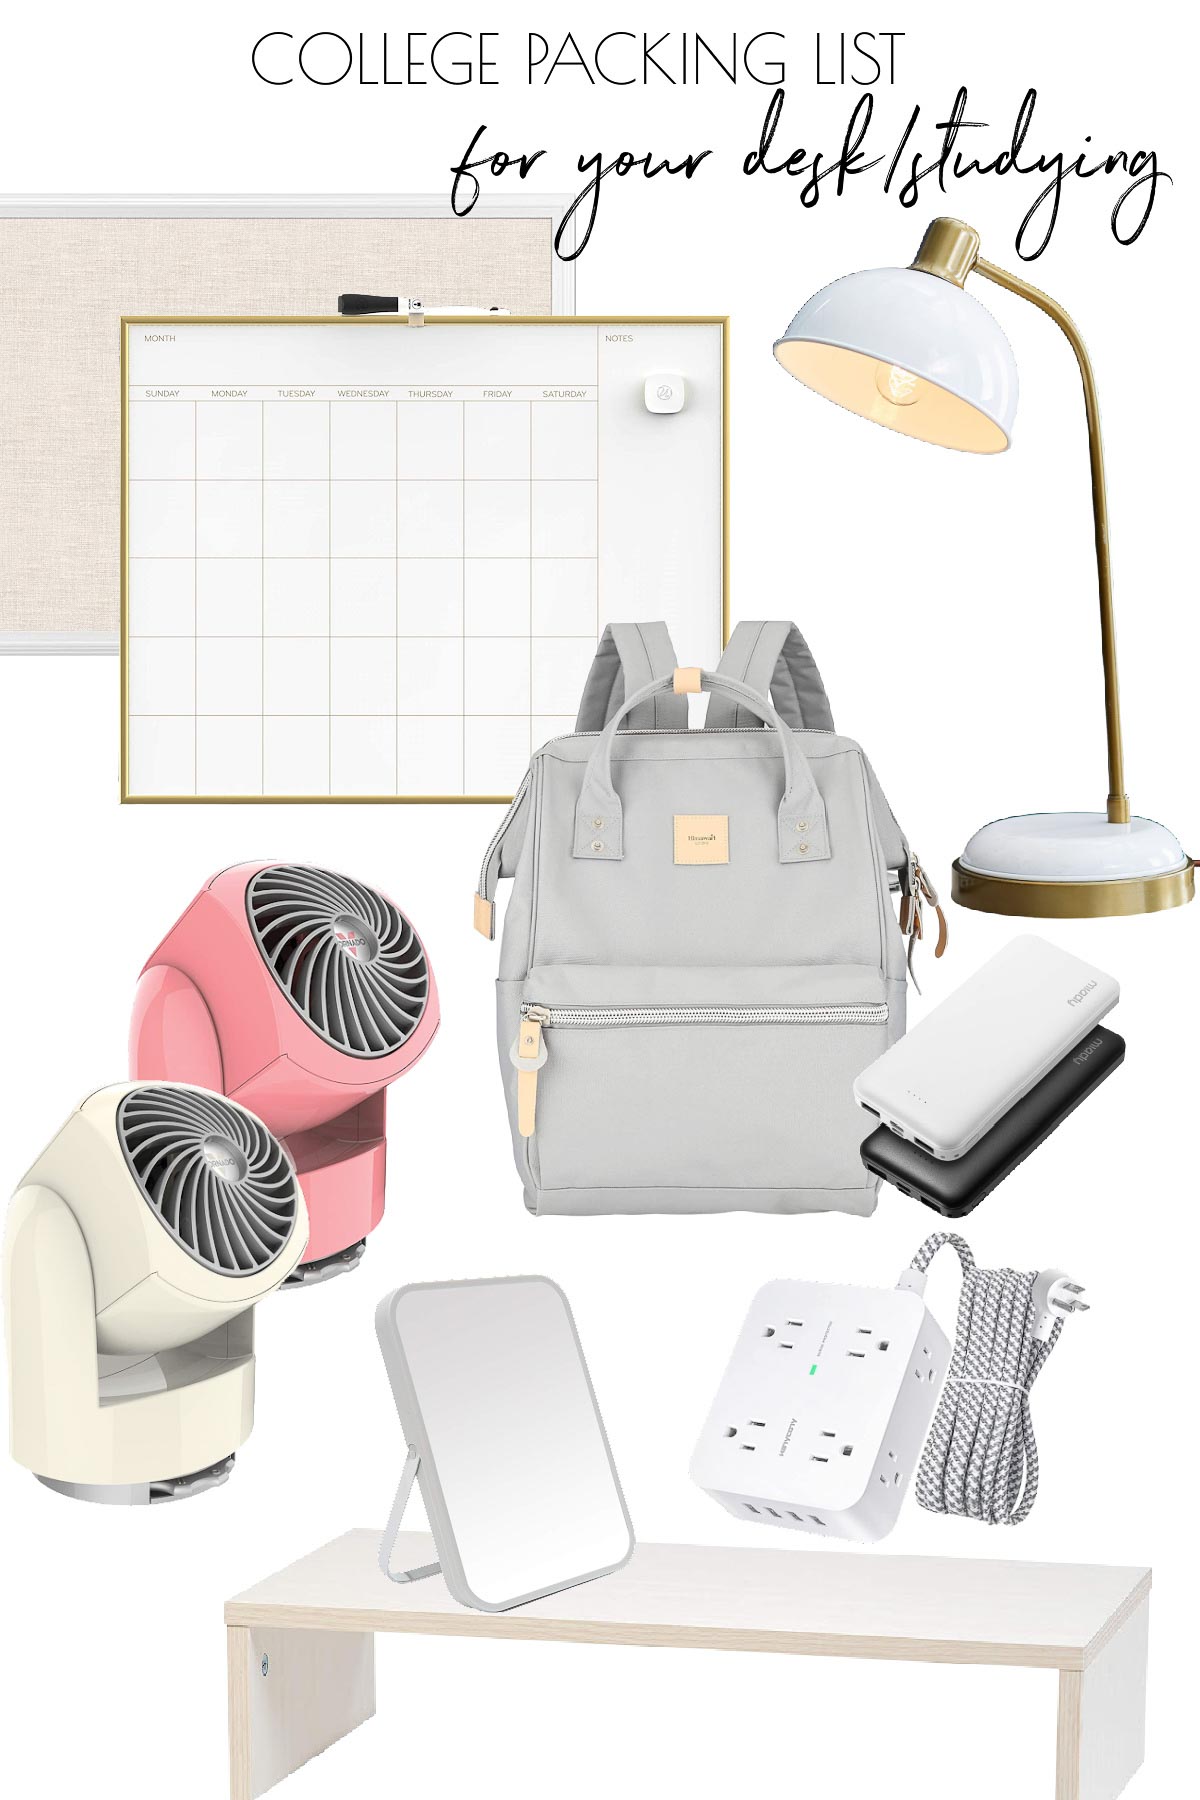 Desk & study items to add to your college packing list!